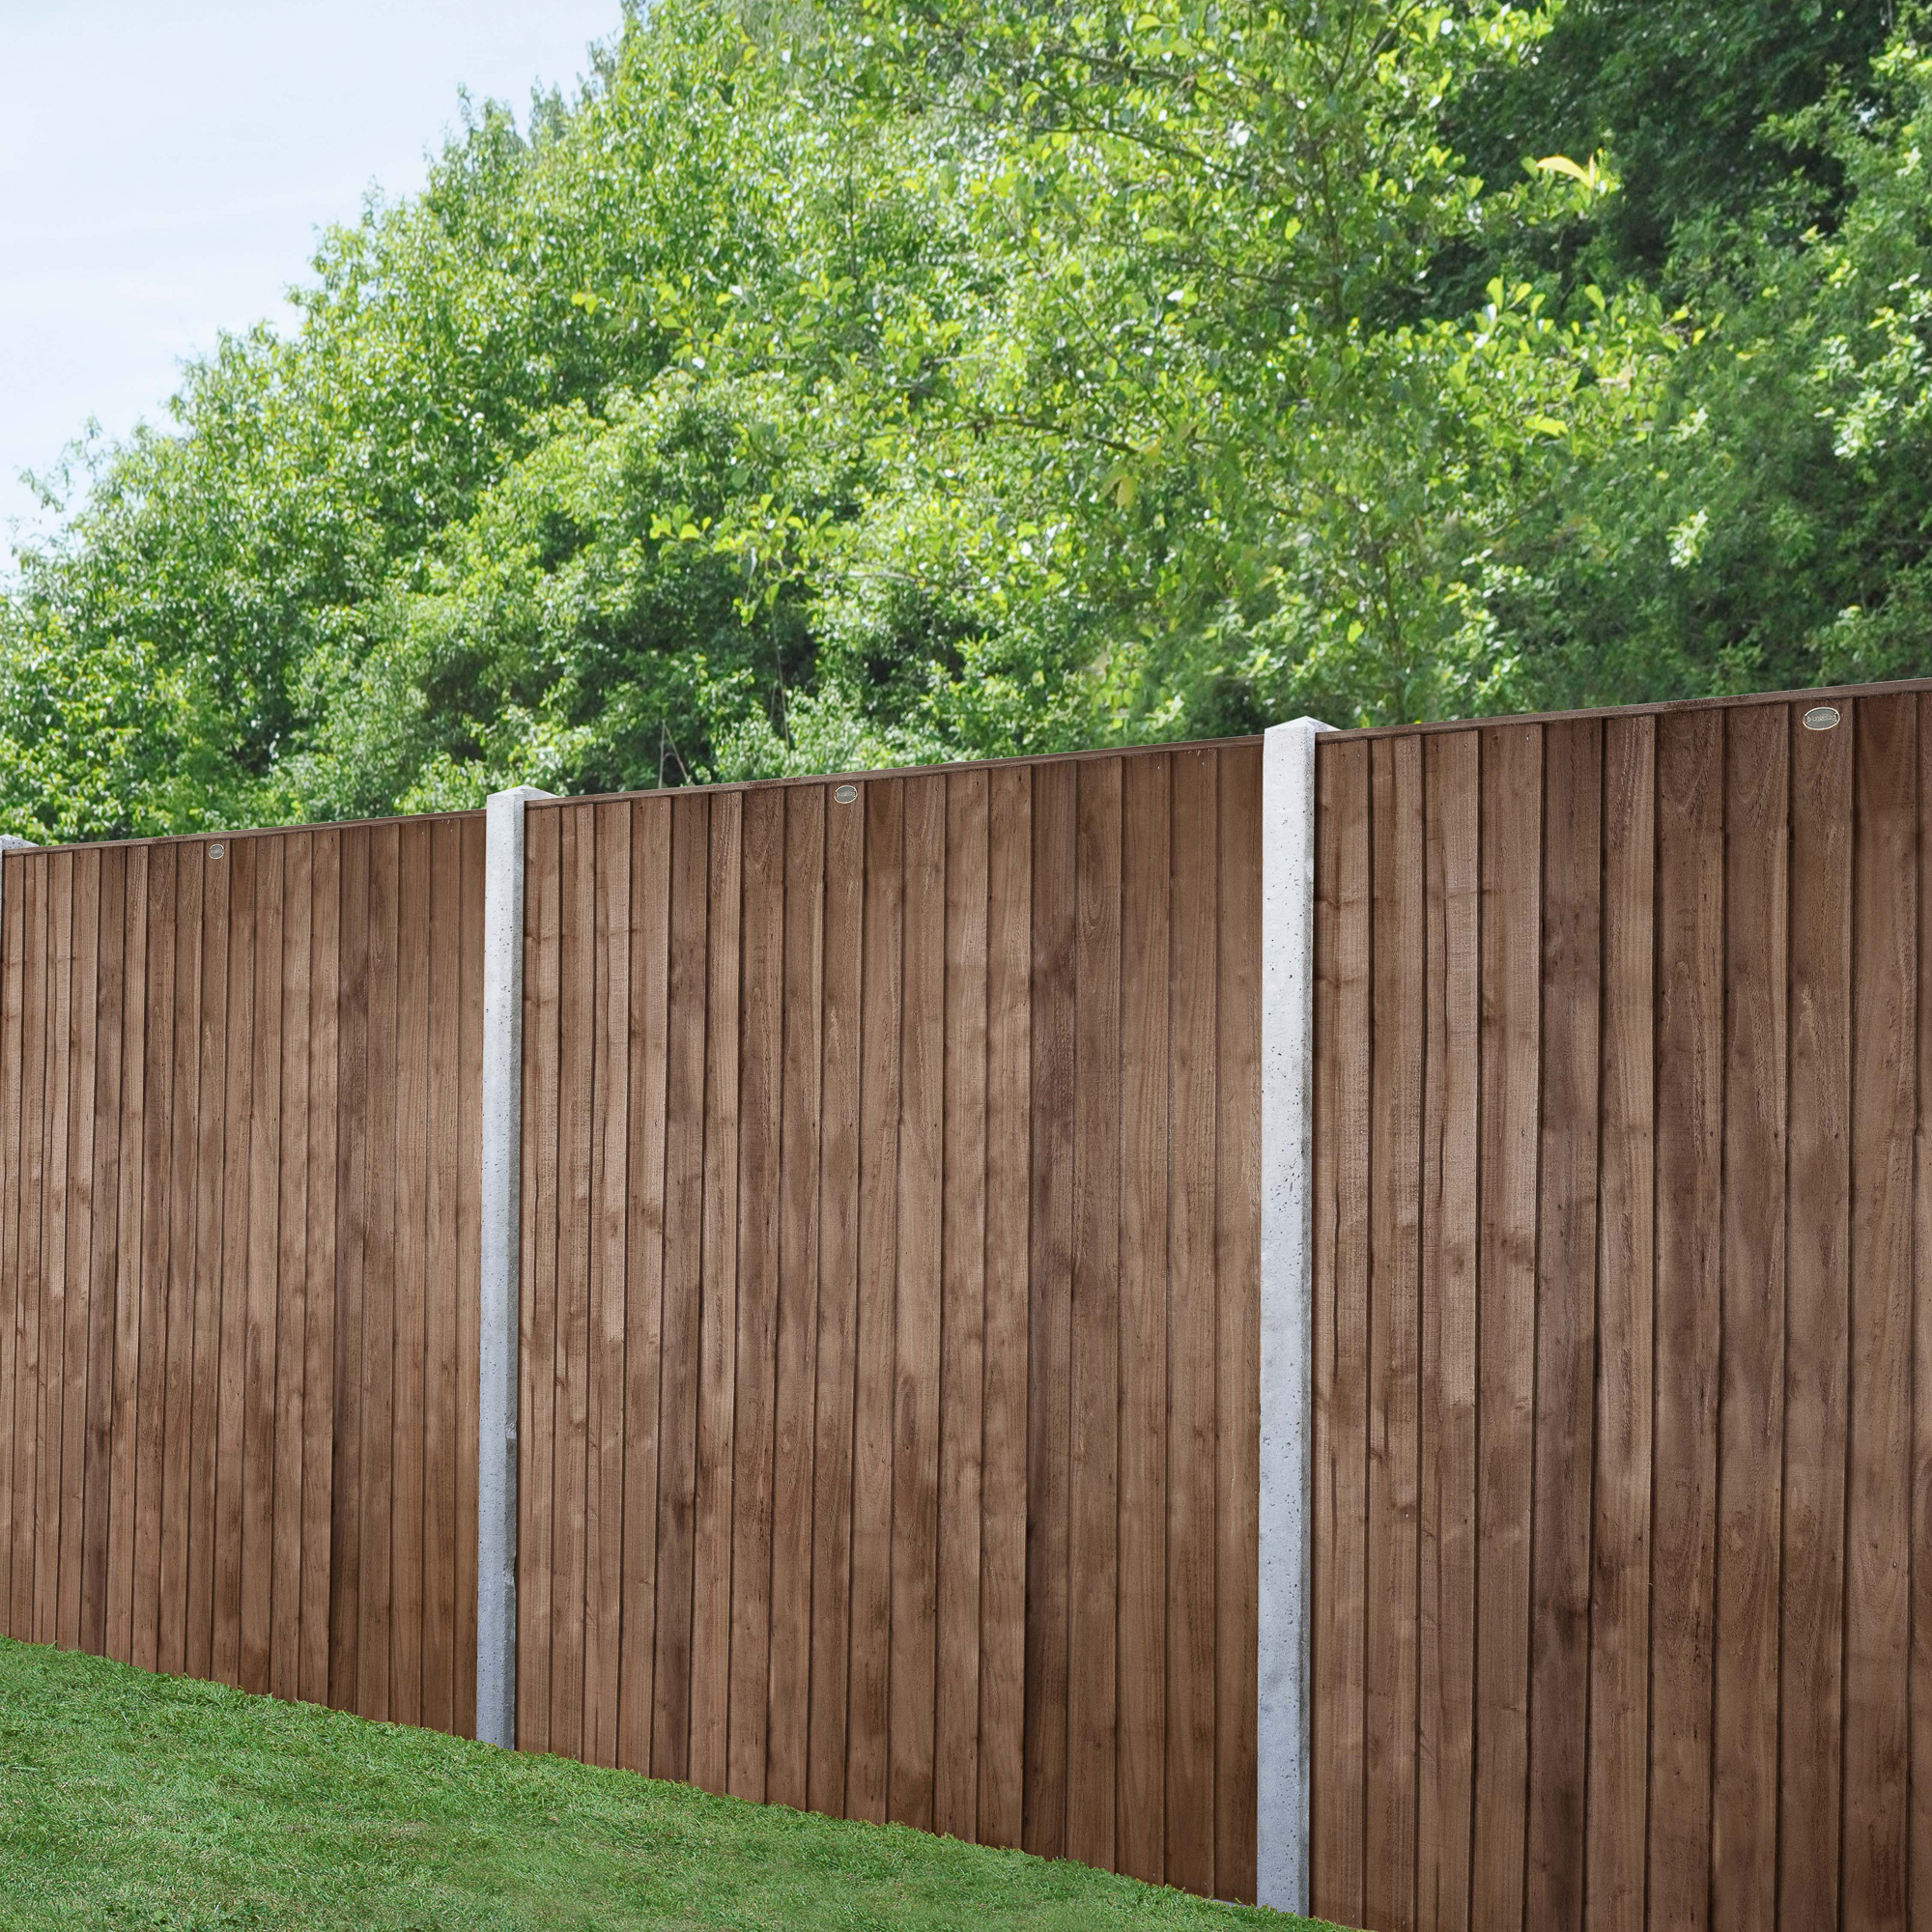 Image of Forest Garden Brown Pressure Treated Closeboard Fence Panel - 1830 x 1680mm - 6 x 5'6ft - Pack of 5